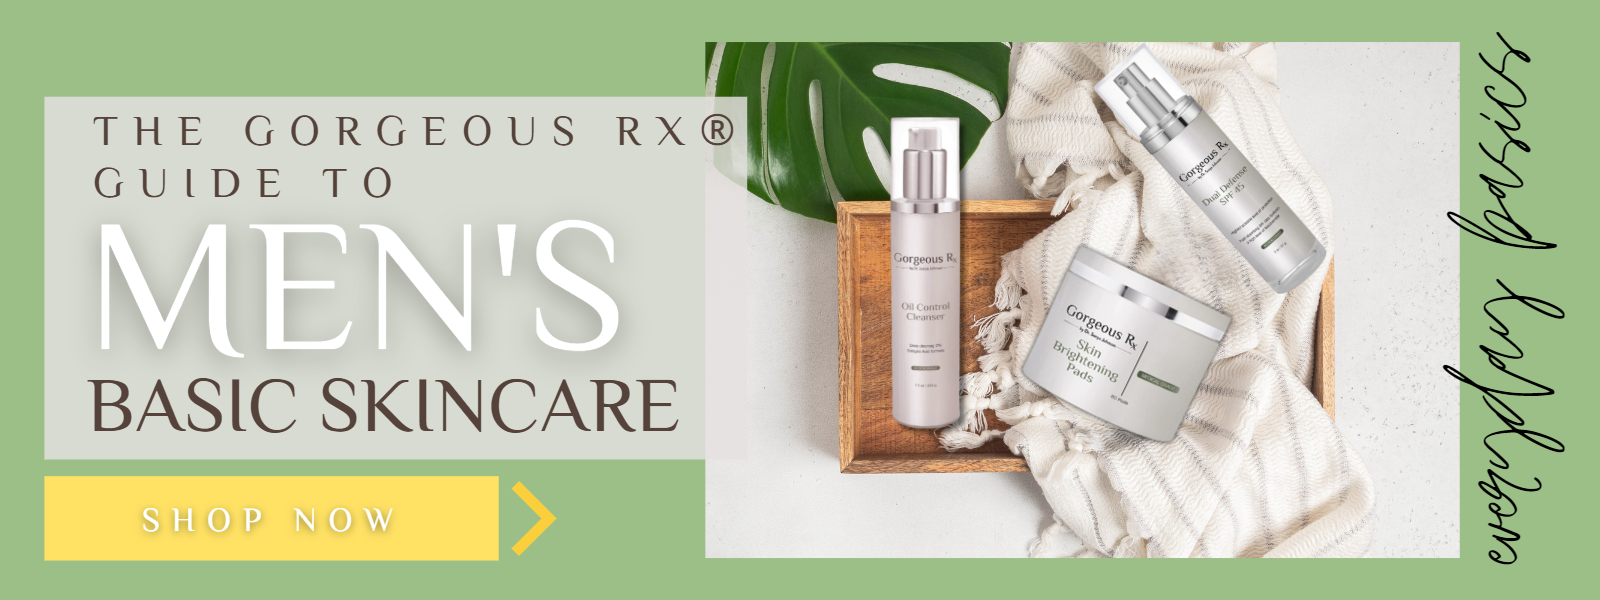 THE GORGEOUS RX® GUIDE TO MEN'S BASIC SKINCARE